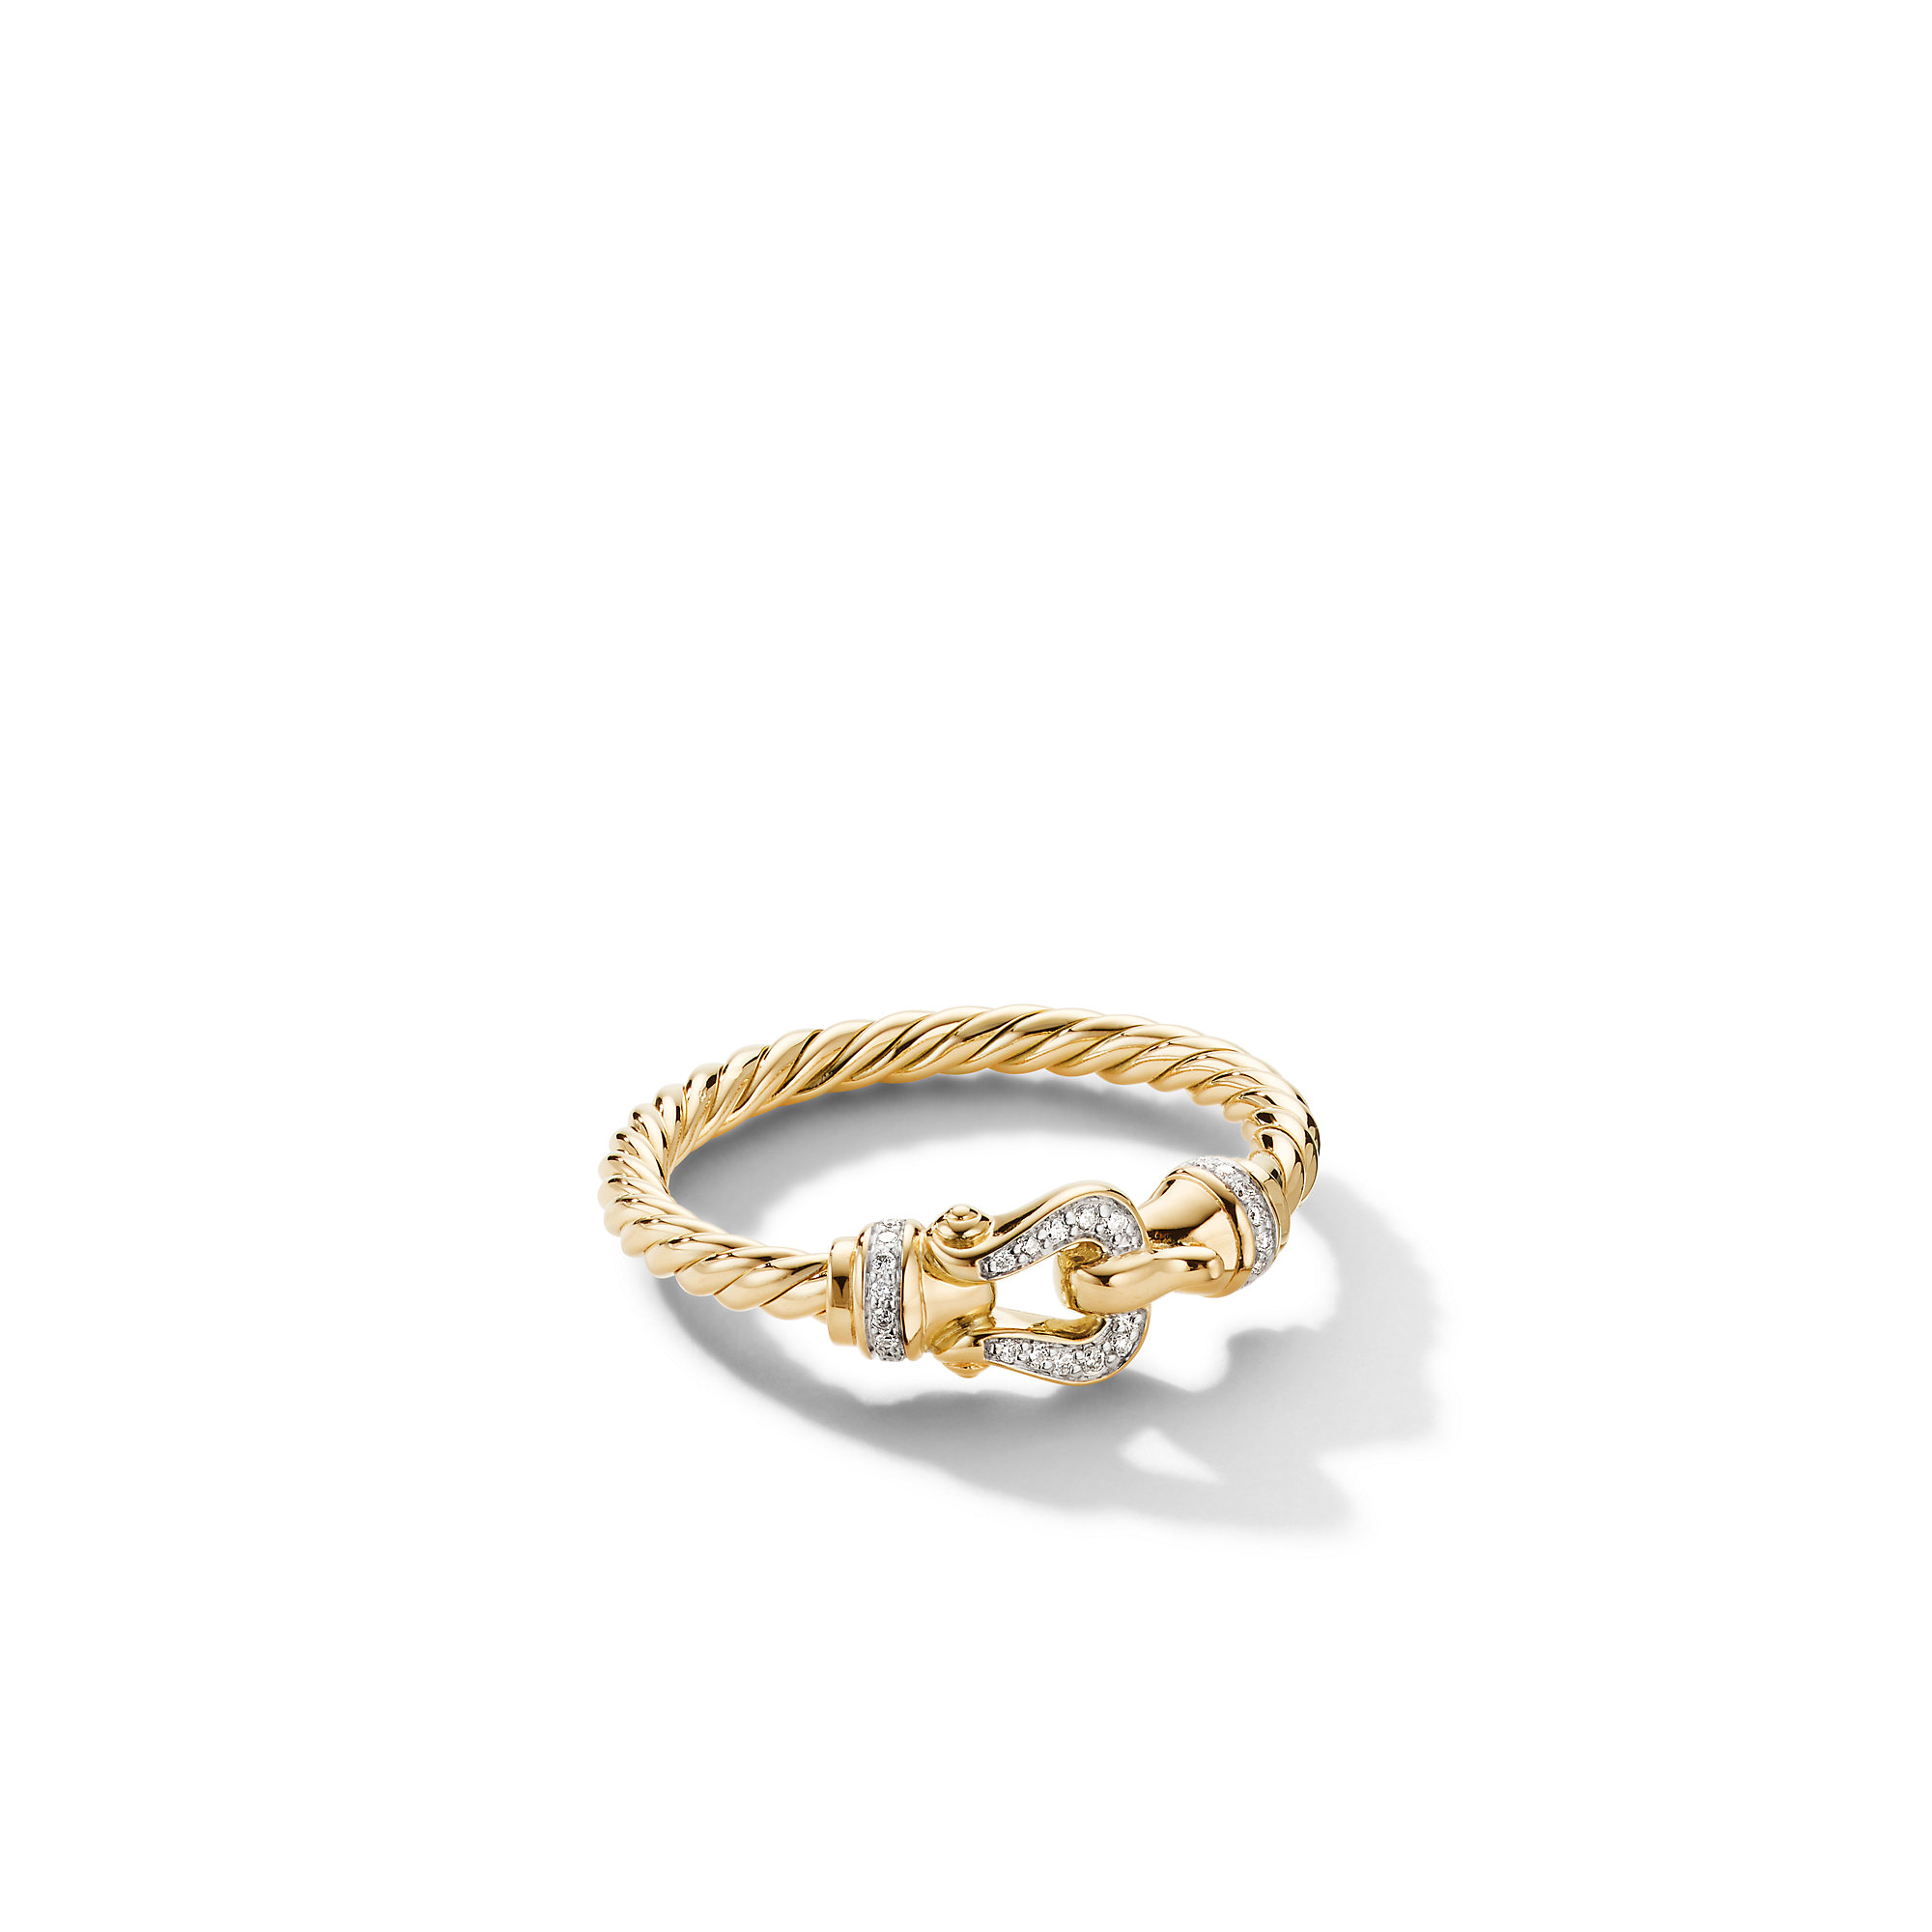 Petite Buckle Ring in 18K Yellow Gold with Pave Diamonds